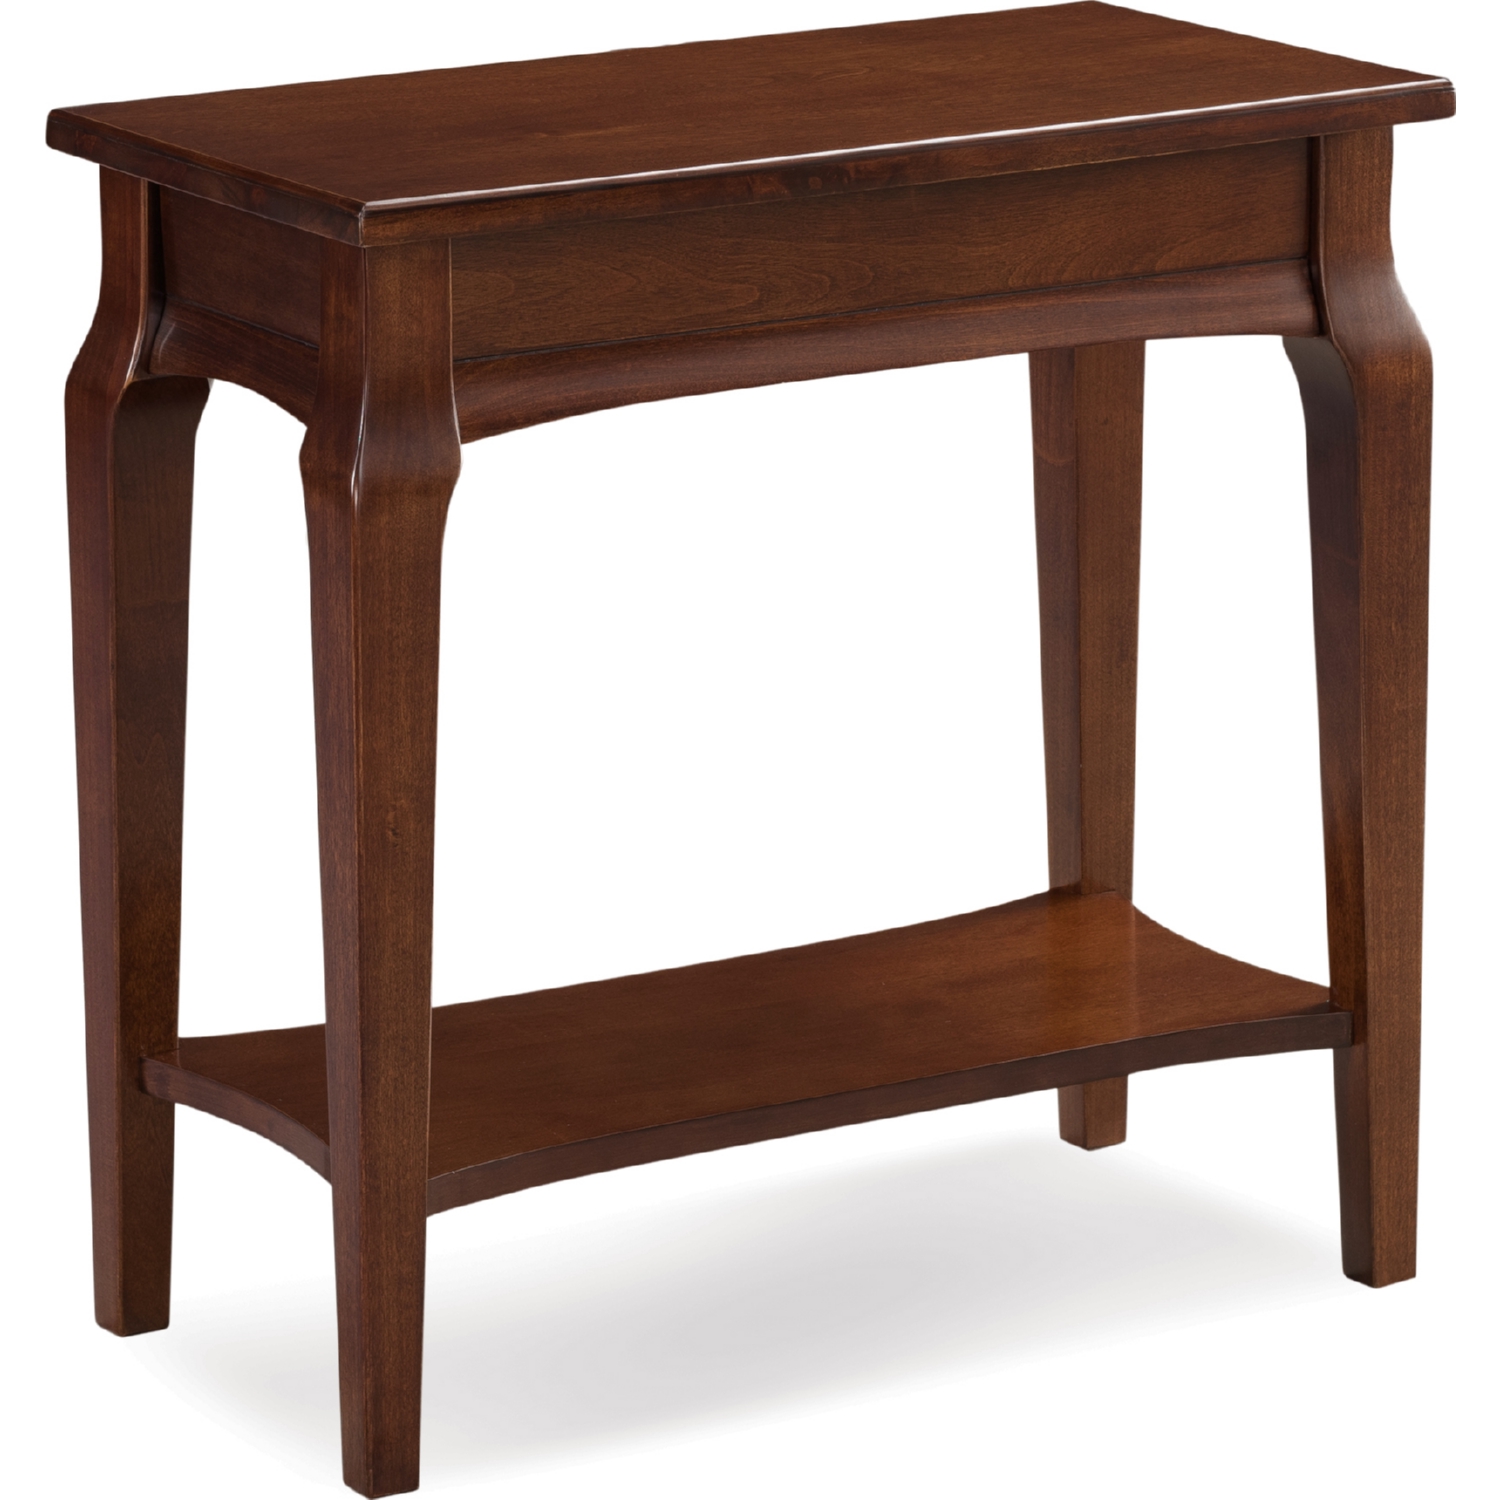 Leick 22005 Stratus Narrow Chairside End Table In Heartwood Cherry